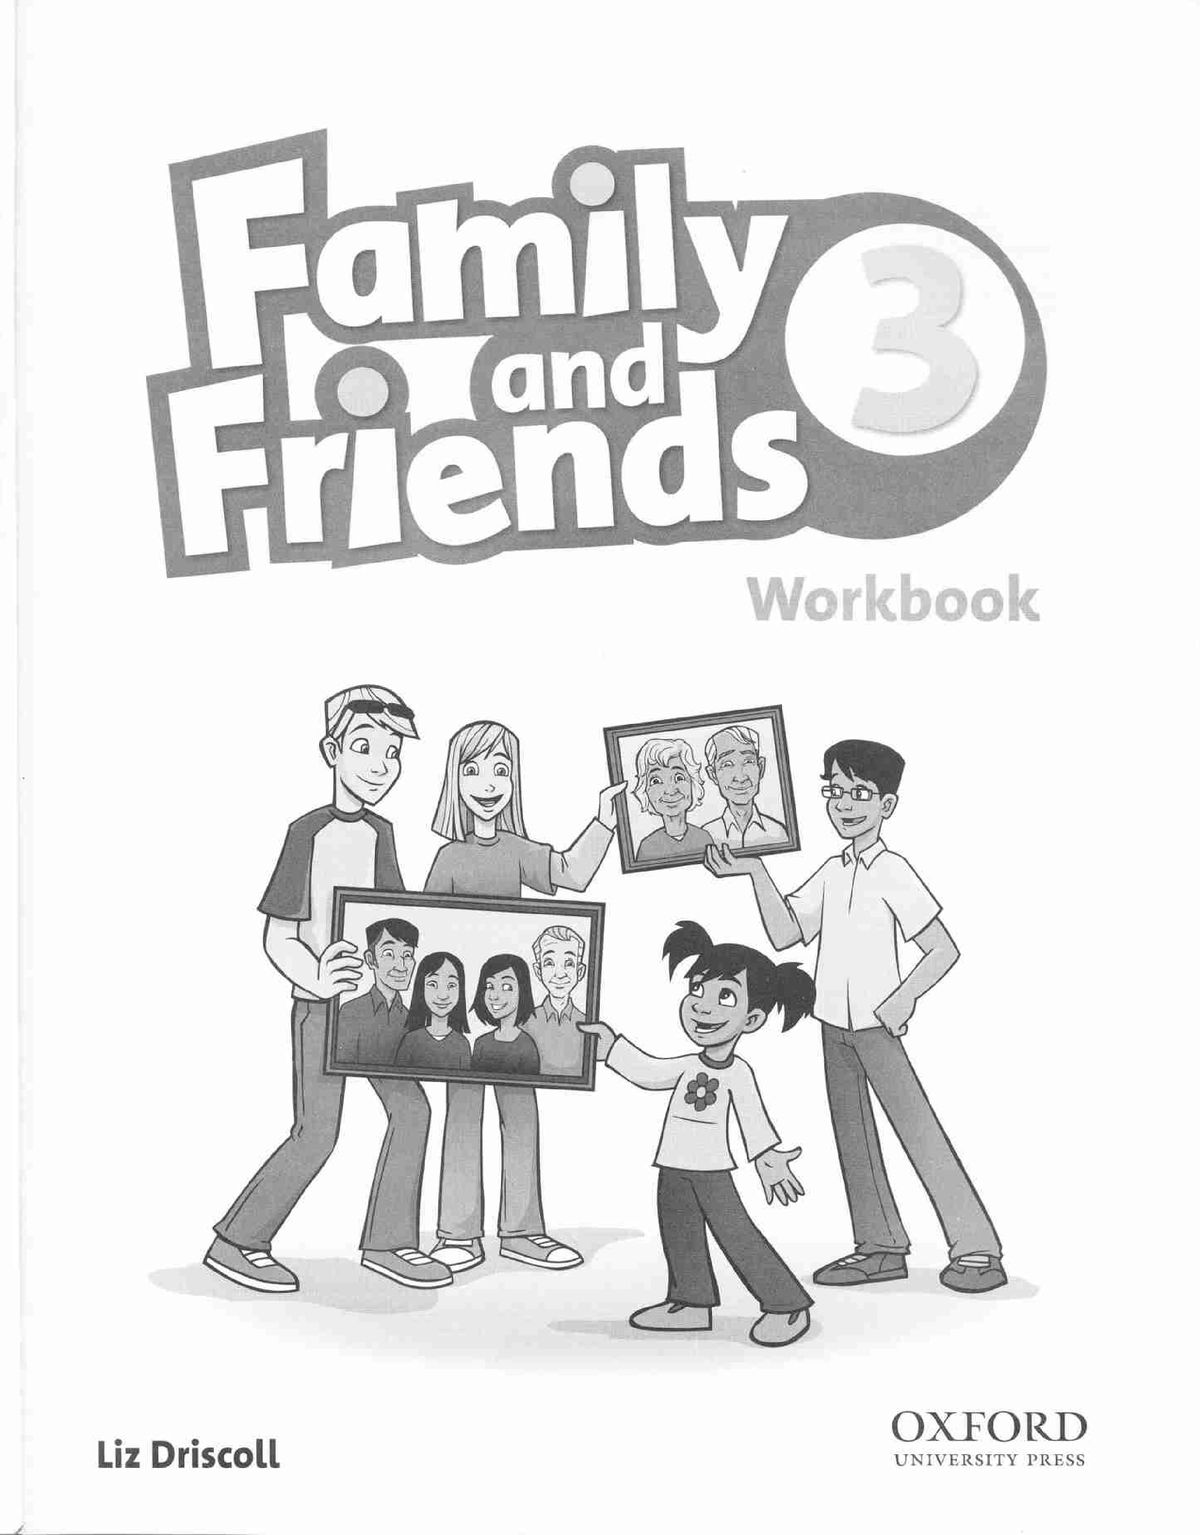 Family and friends 3 Workbook. Family and friends 3 Workbook Оксфорд Liz Driscoll. Family and friends 6 класс. Family and friends 4 Workbook. Family and friends 4 unit 1